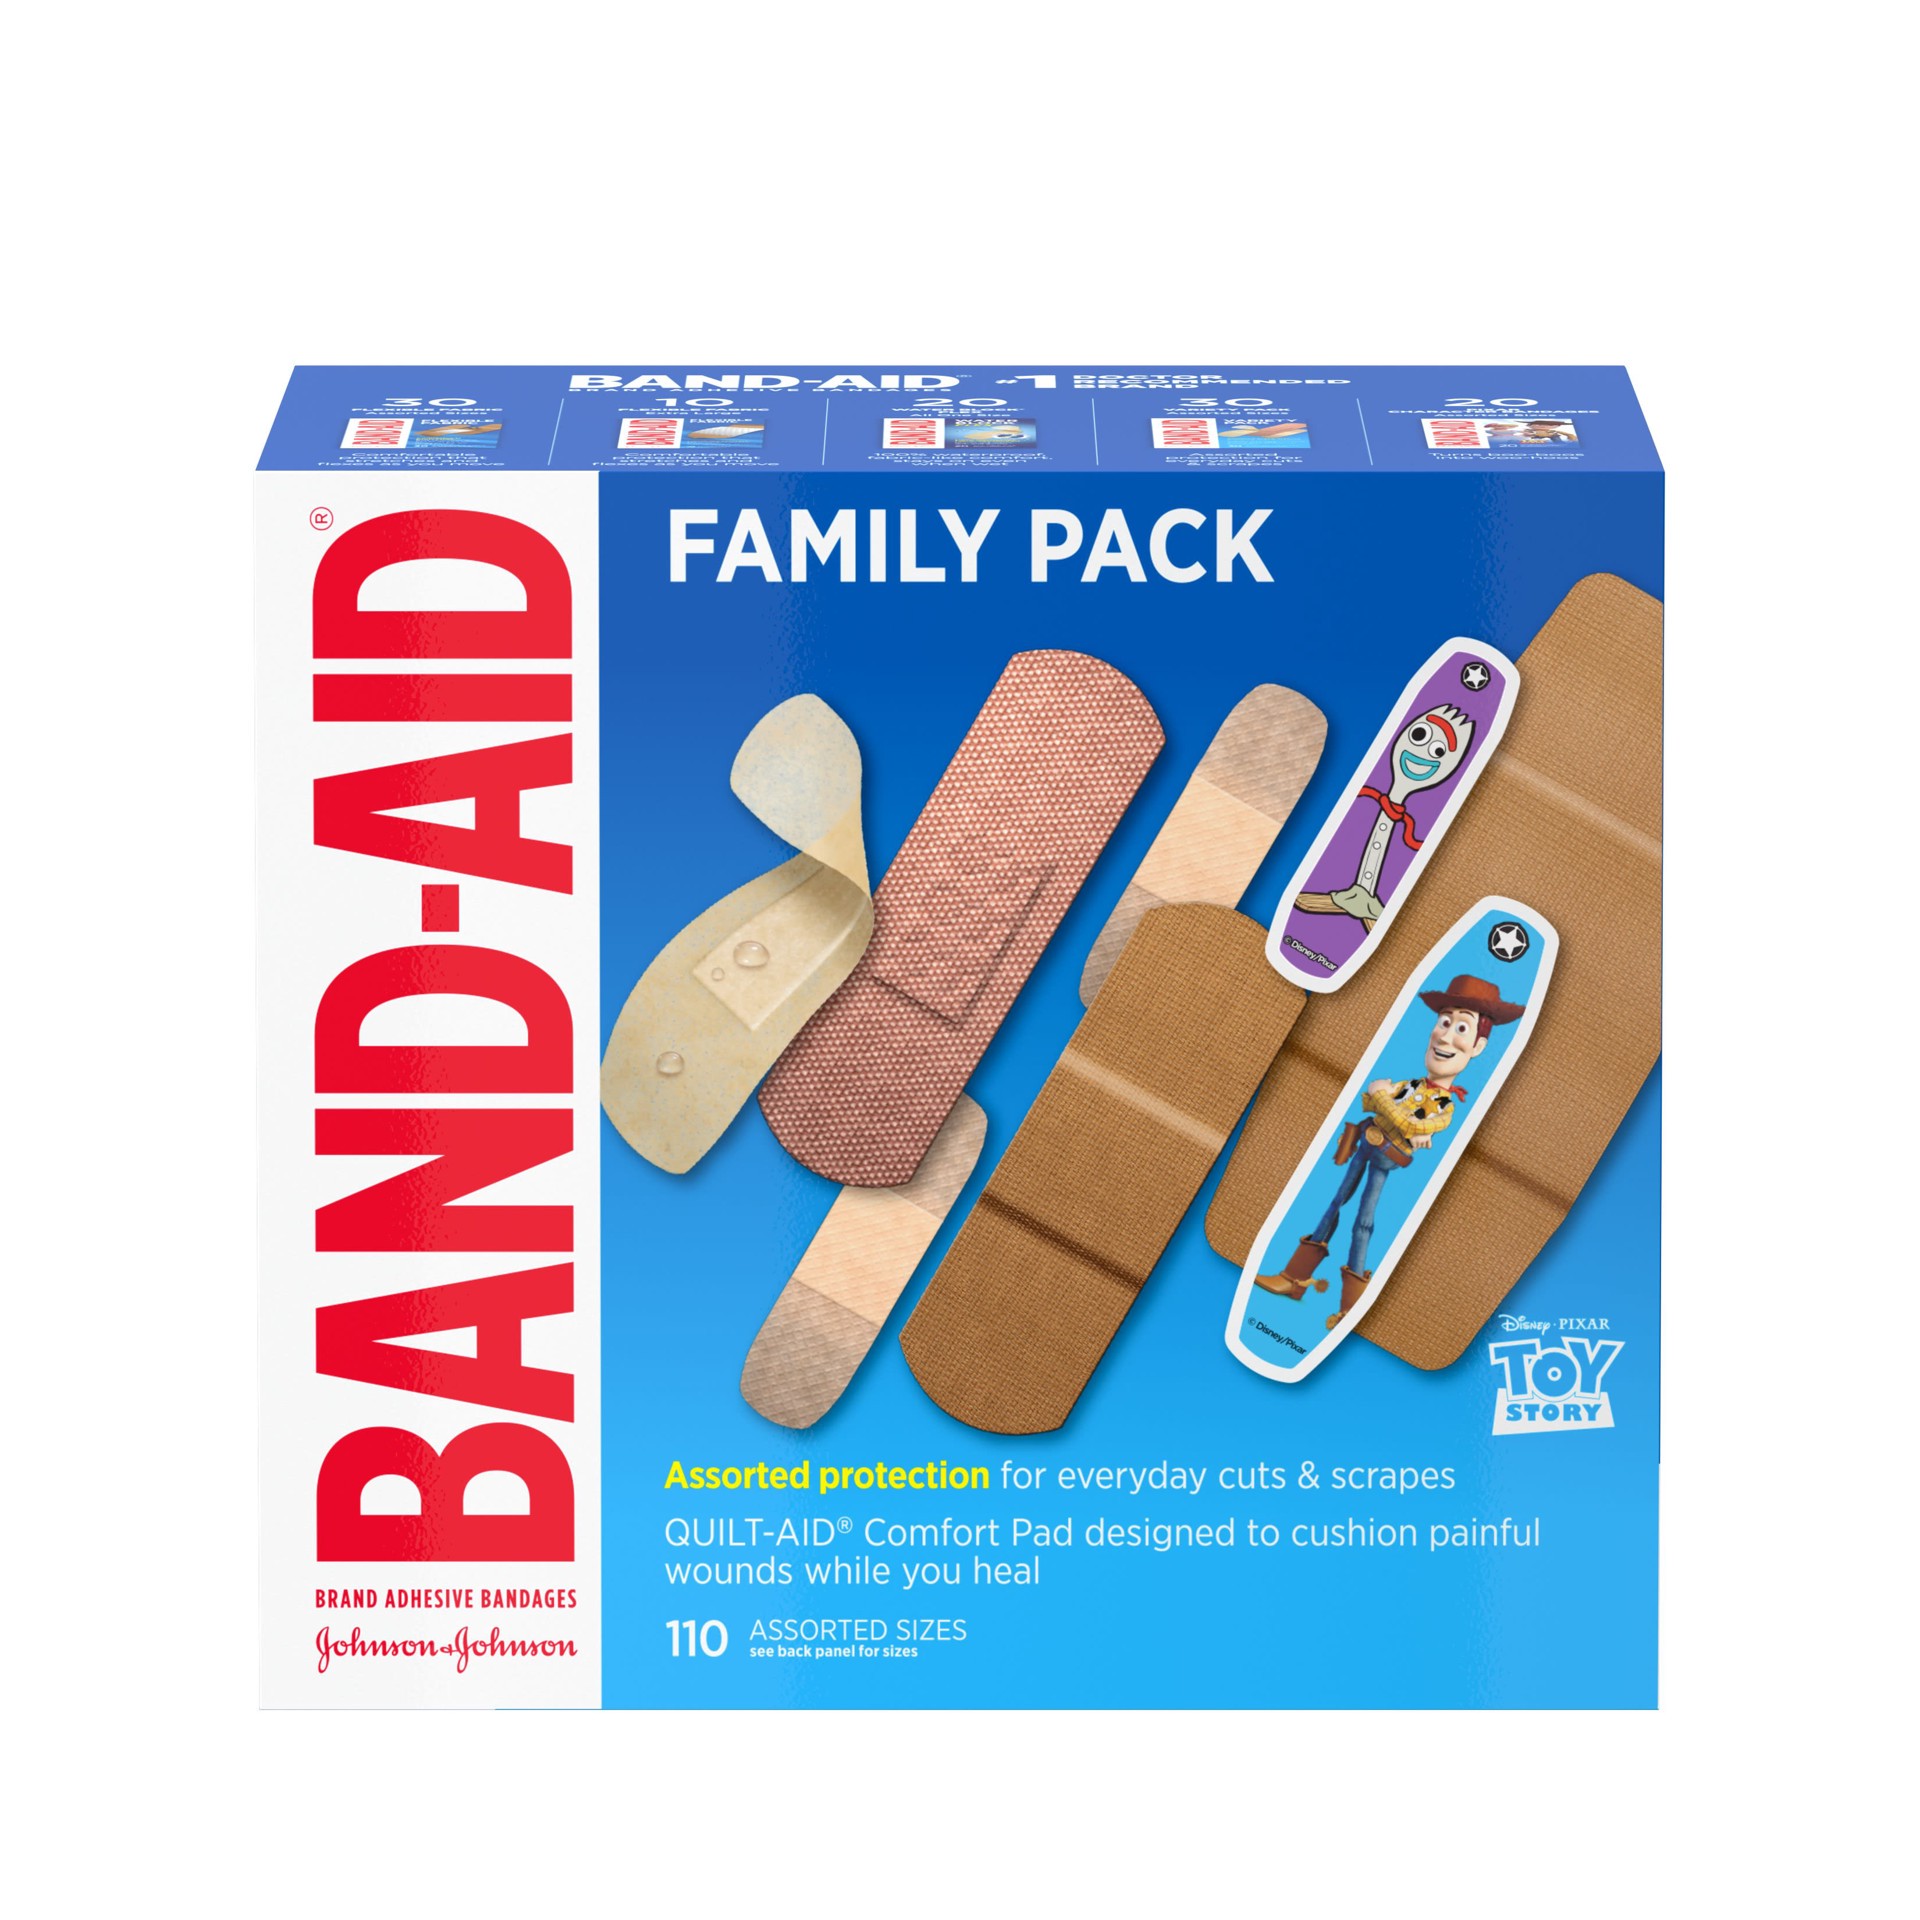 slide 9 of 9, Band-Aid Bandages Family Pack, Assorted Sizes, 110 ct